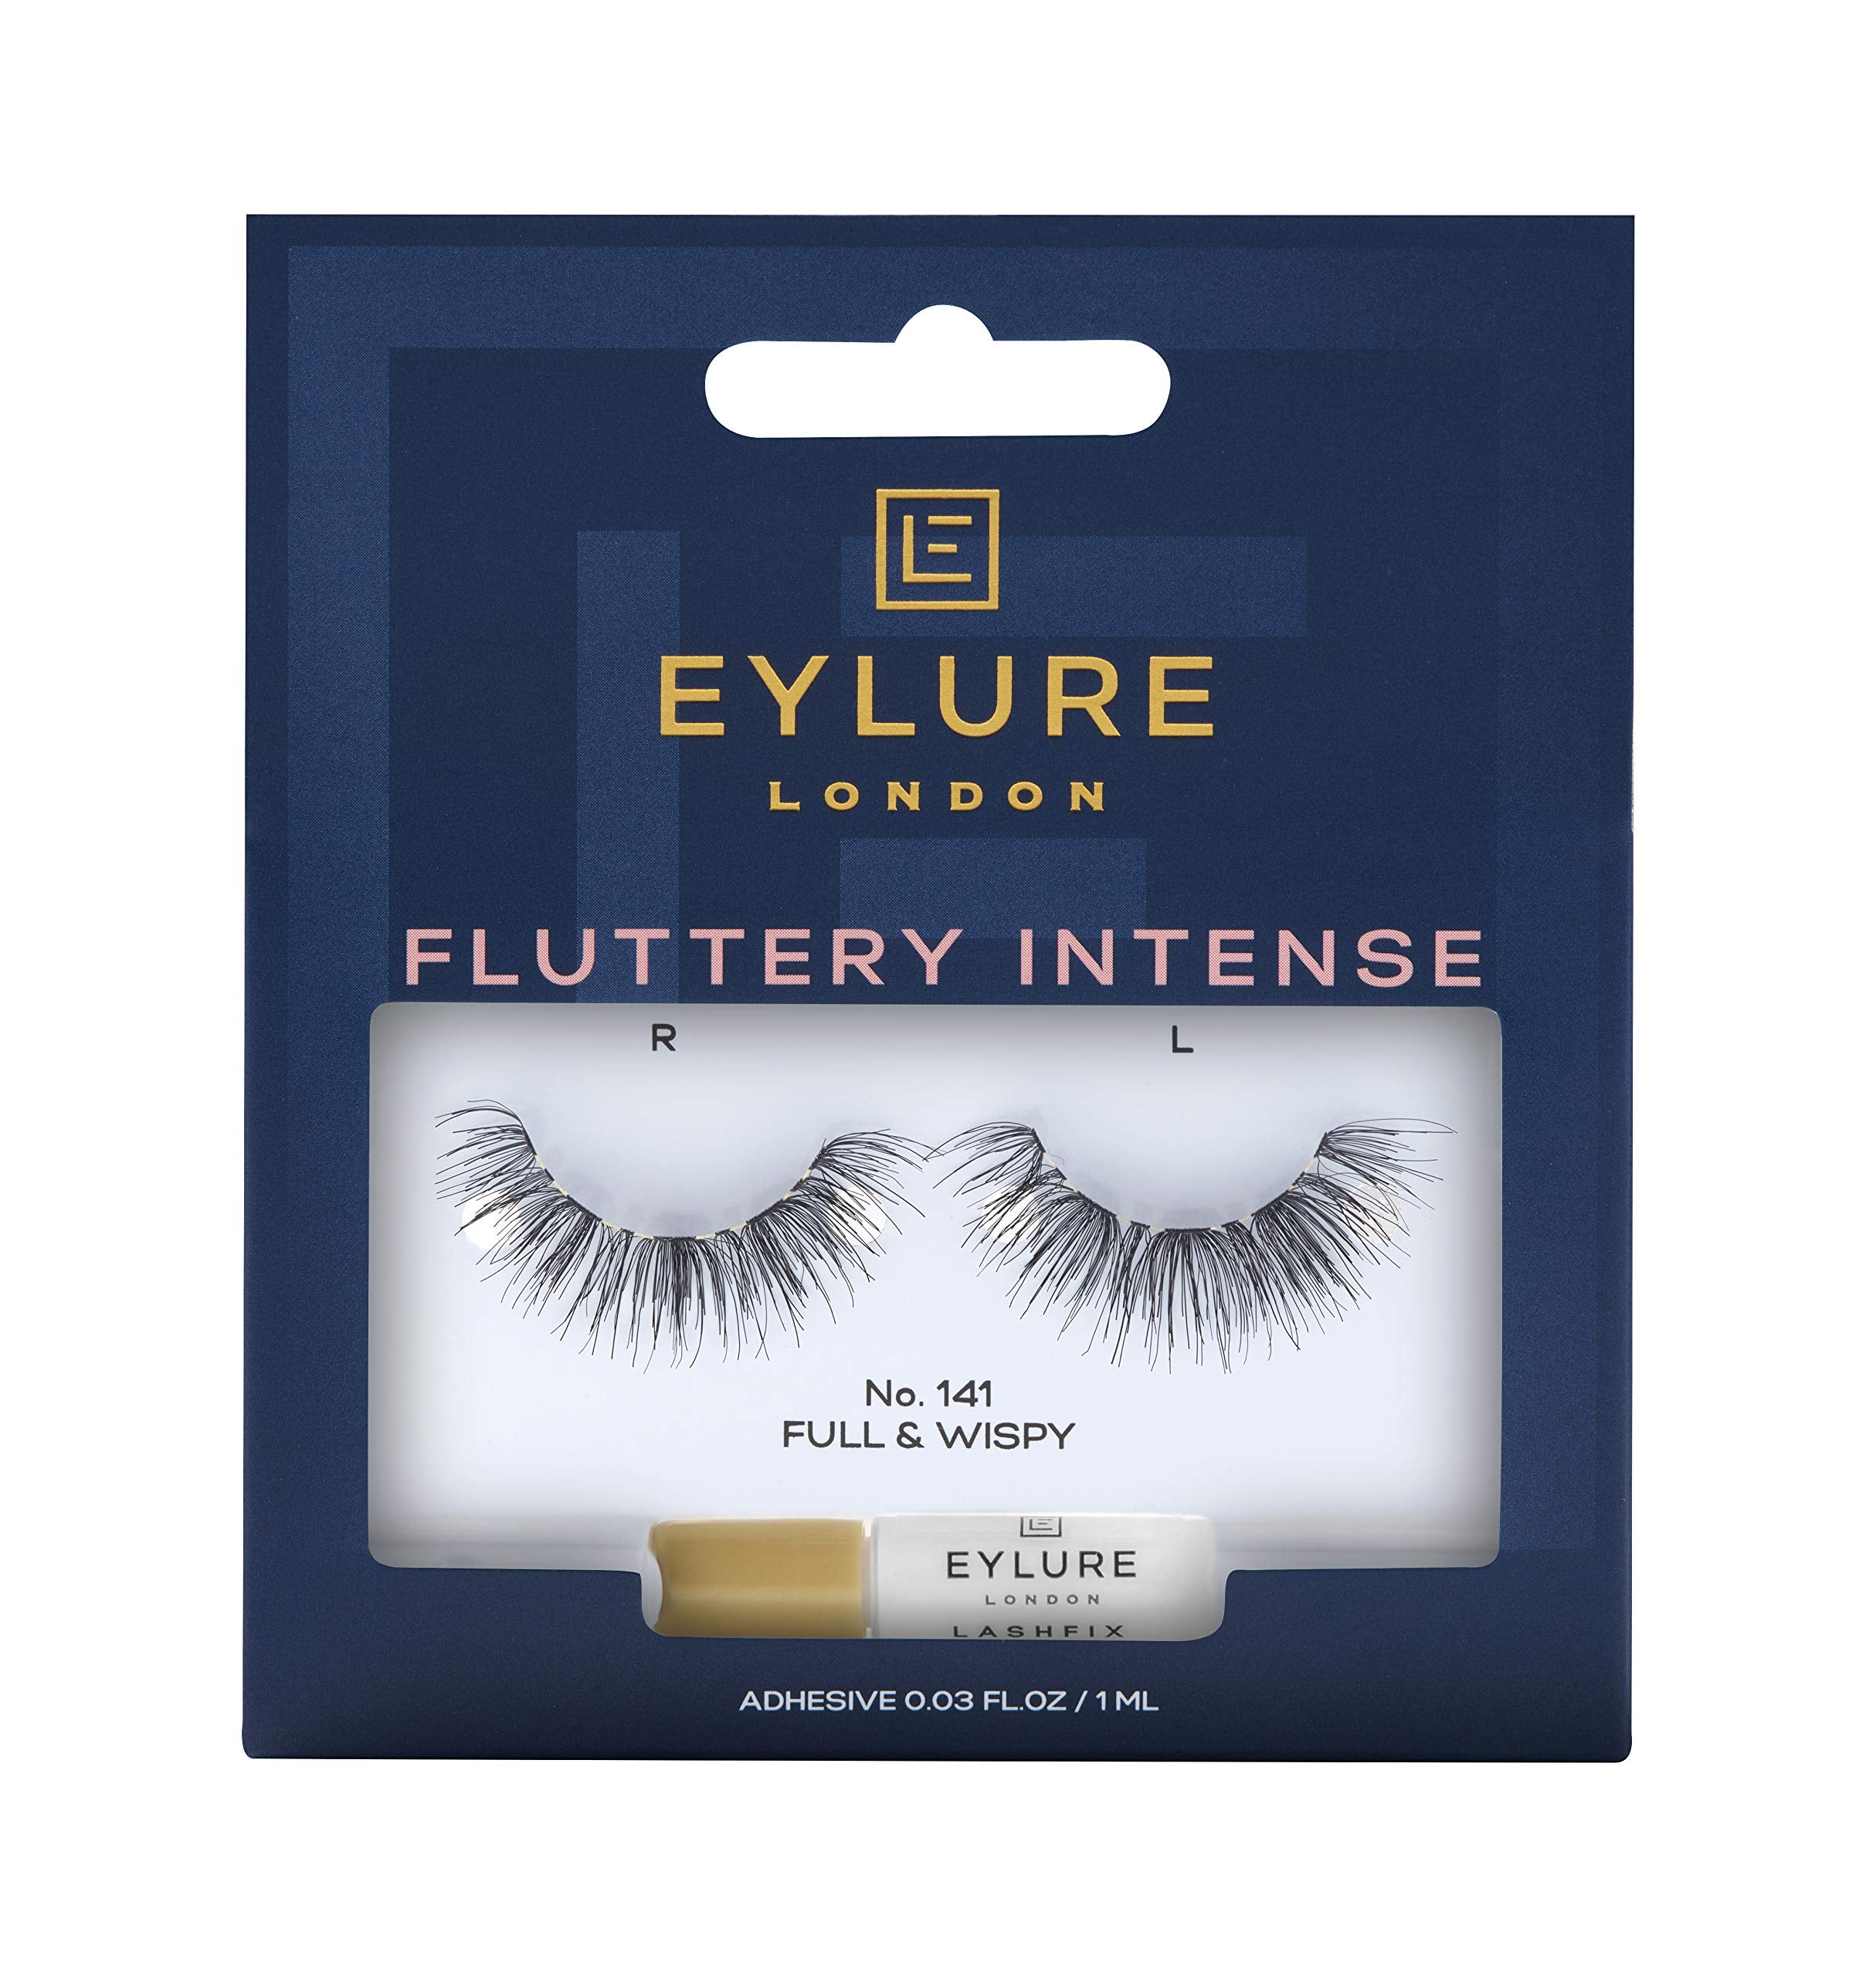 EYLURE LONDON - FLUTTERY INTENSE - No. 141 Full and Wispy